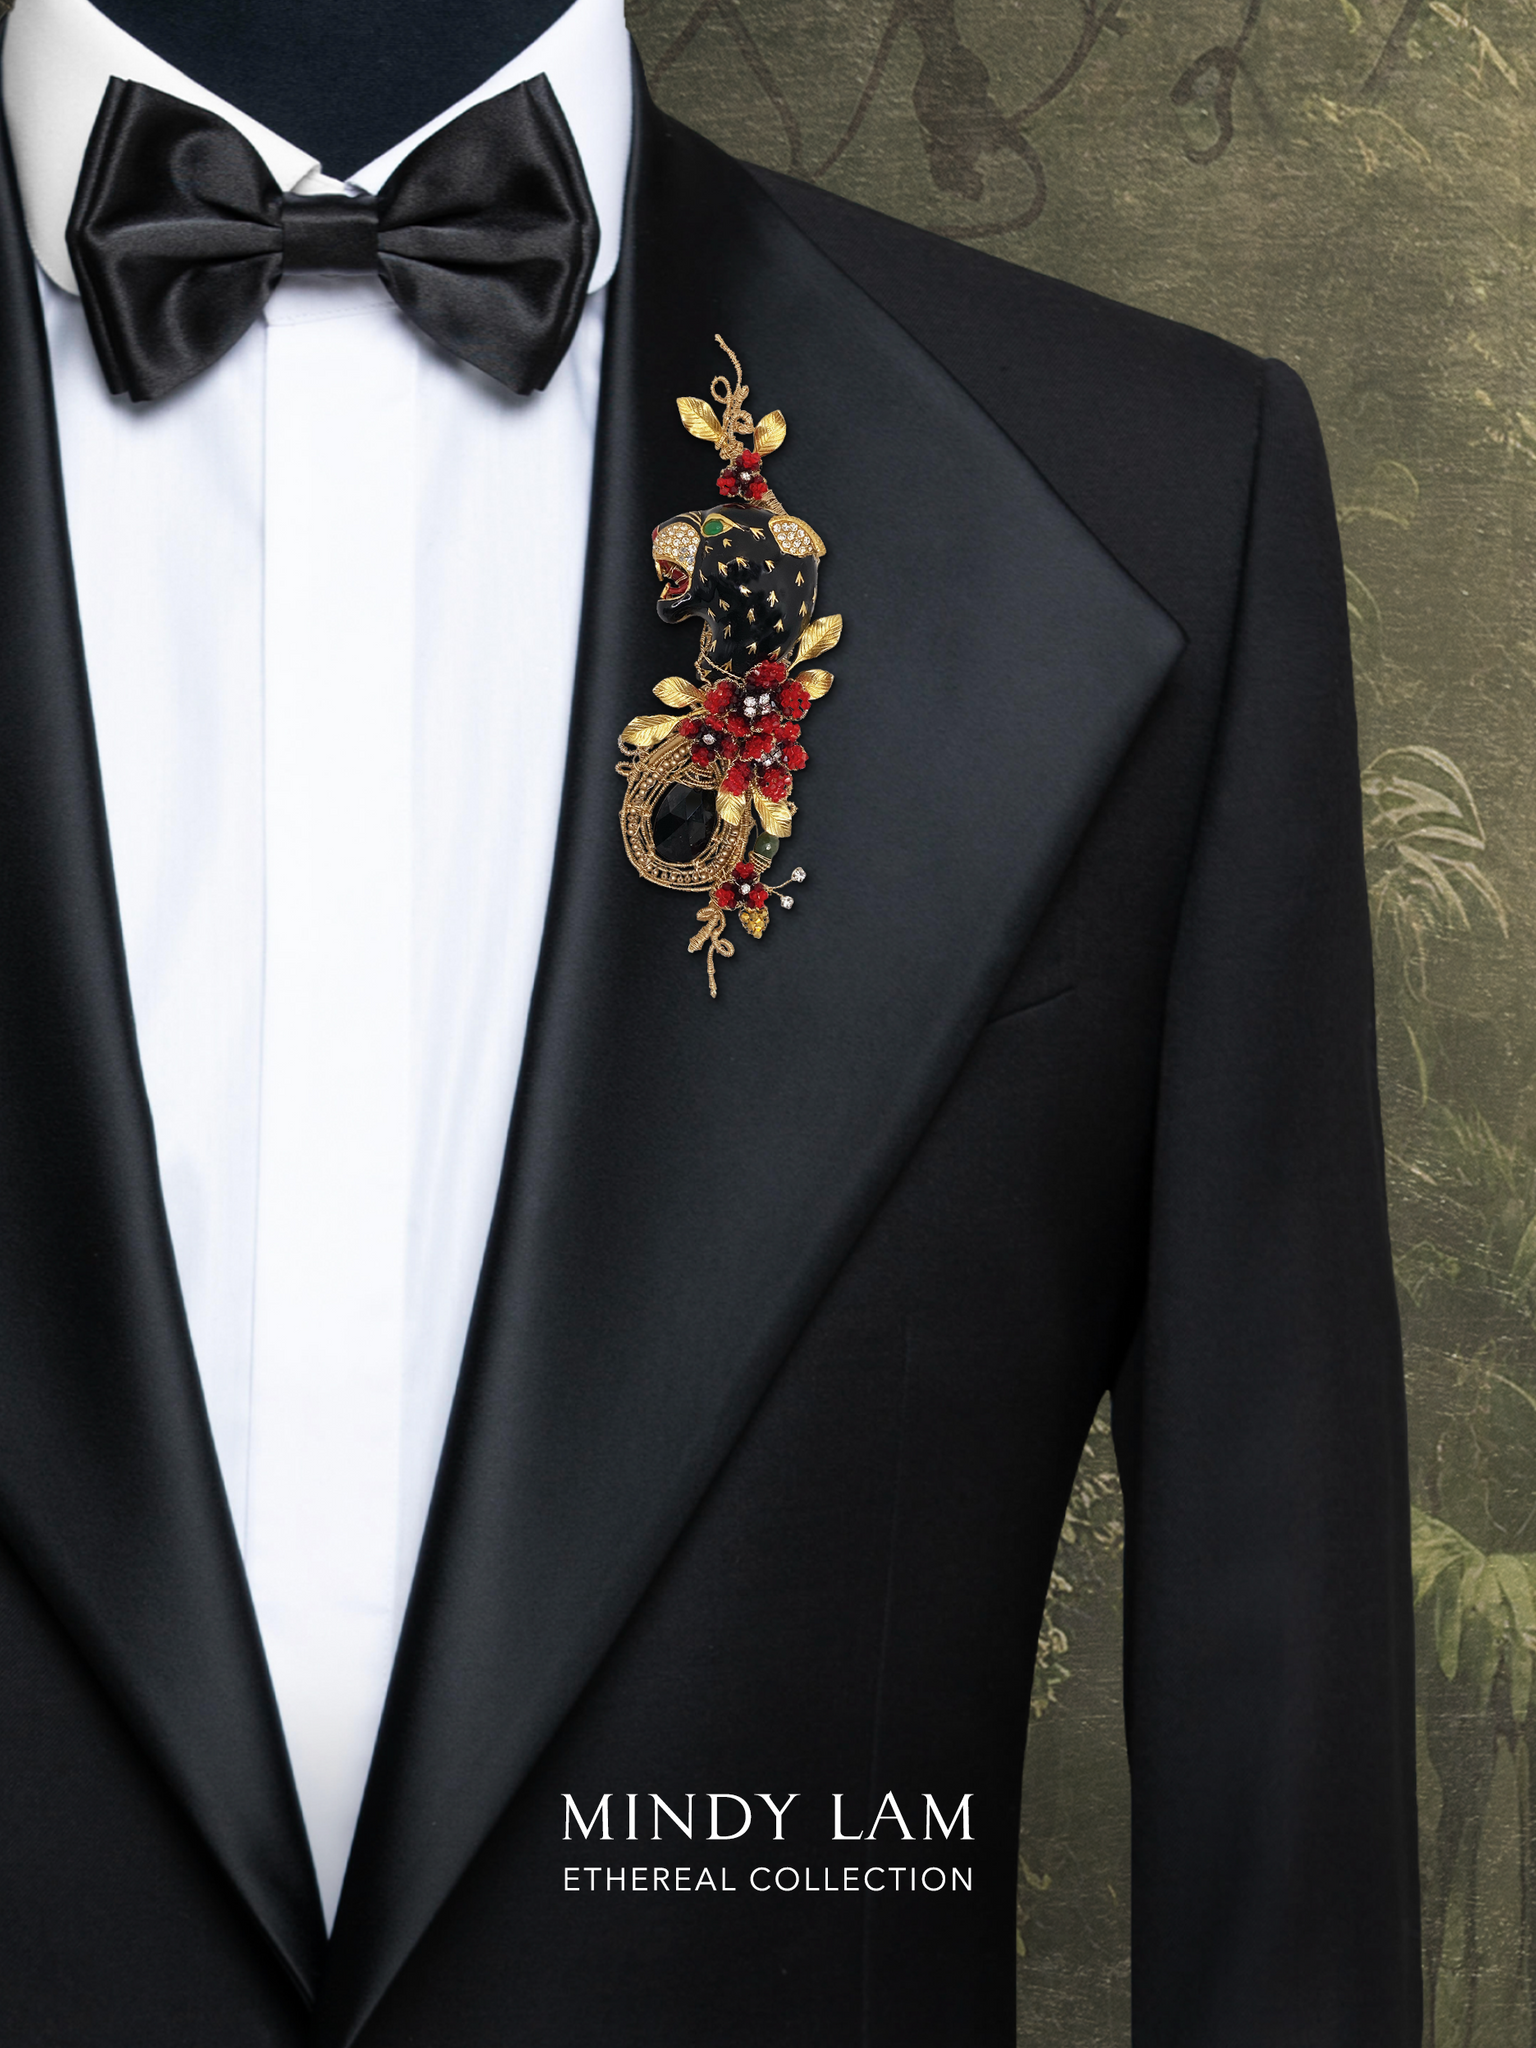 Ethereal Collection Lapel Pin - The Jaguar's Anthem